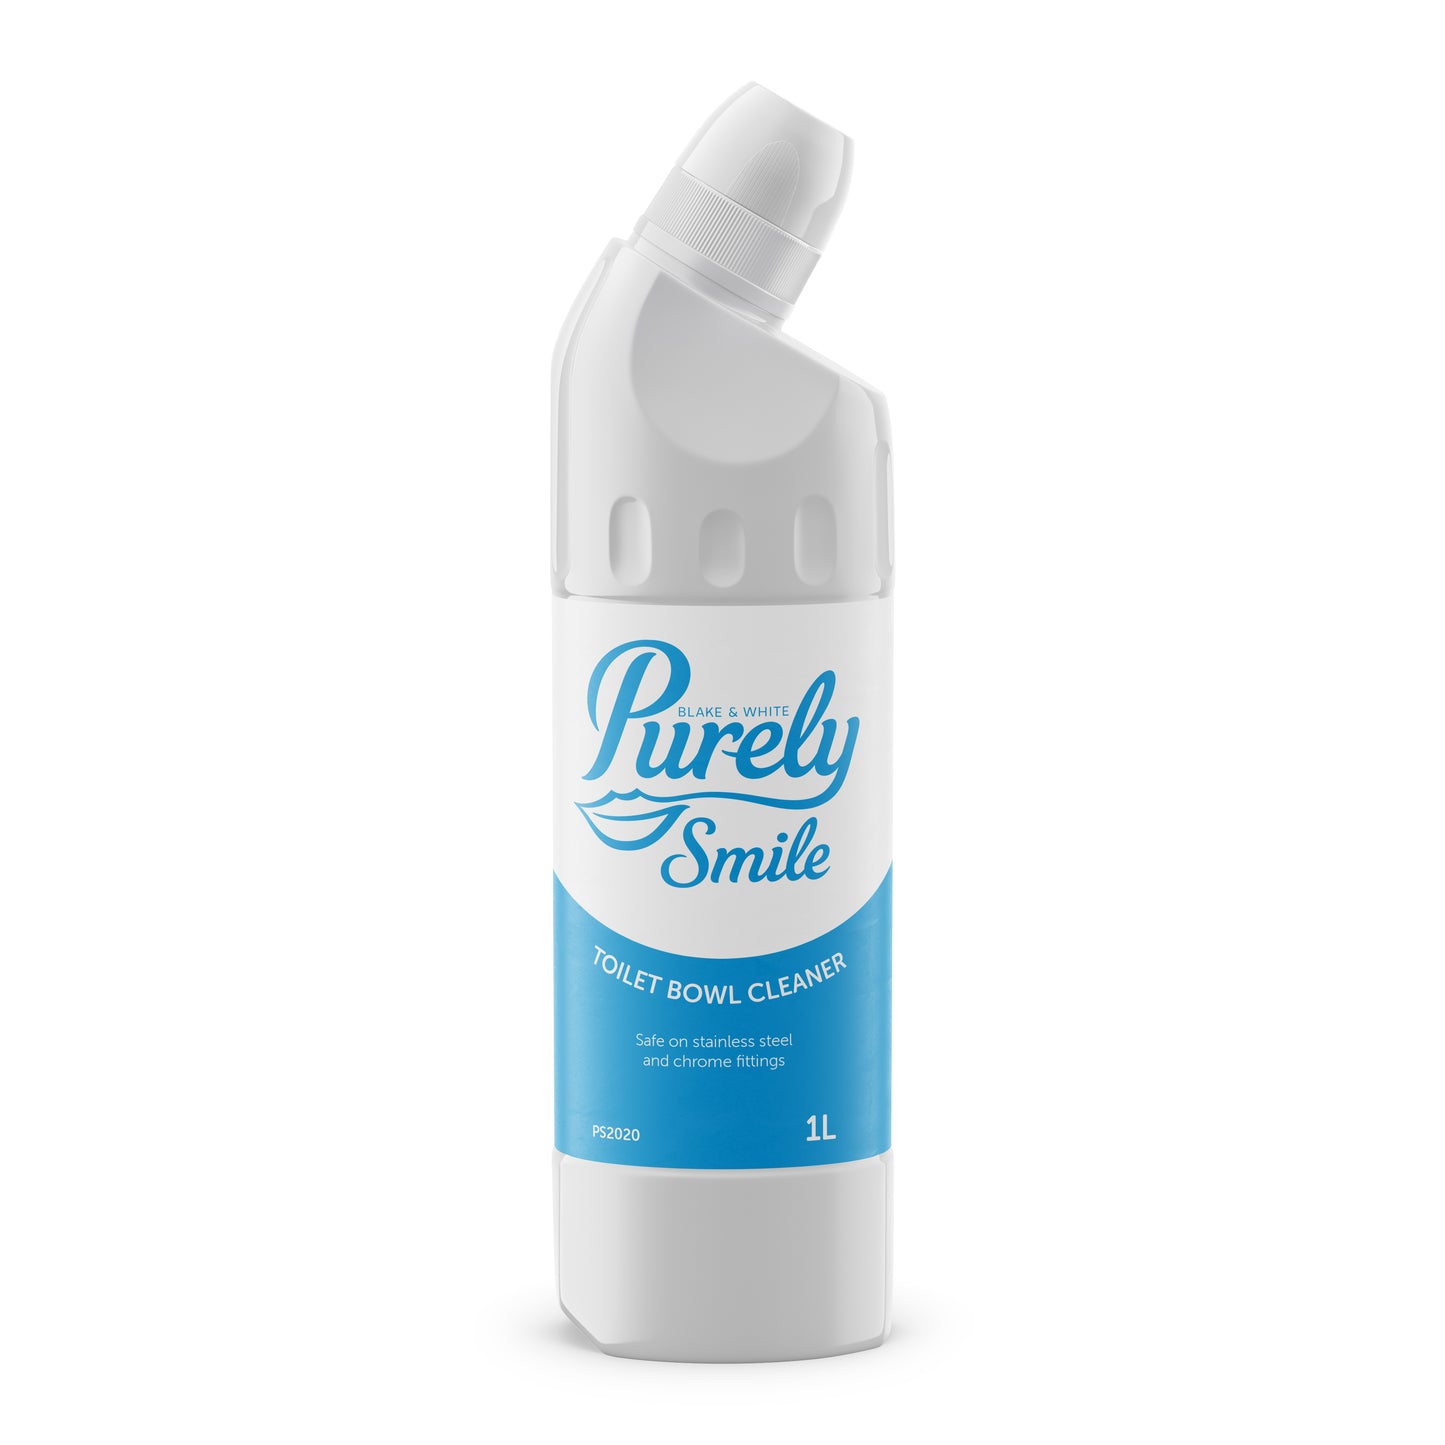 Purely Smile Toilet Bowl Cleaner 1L